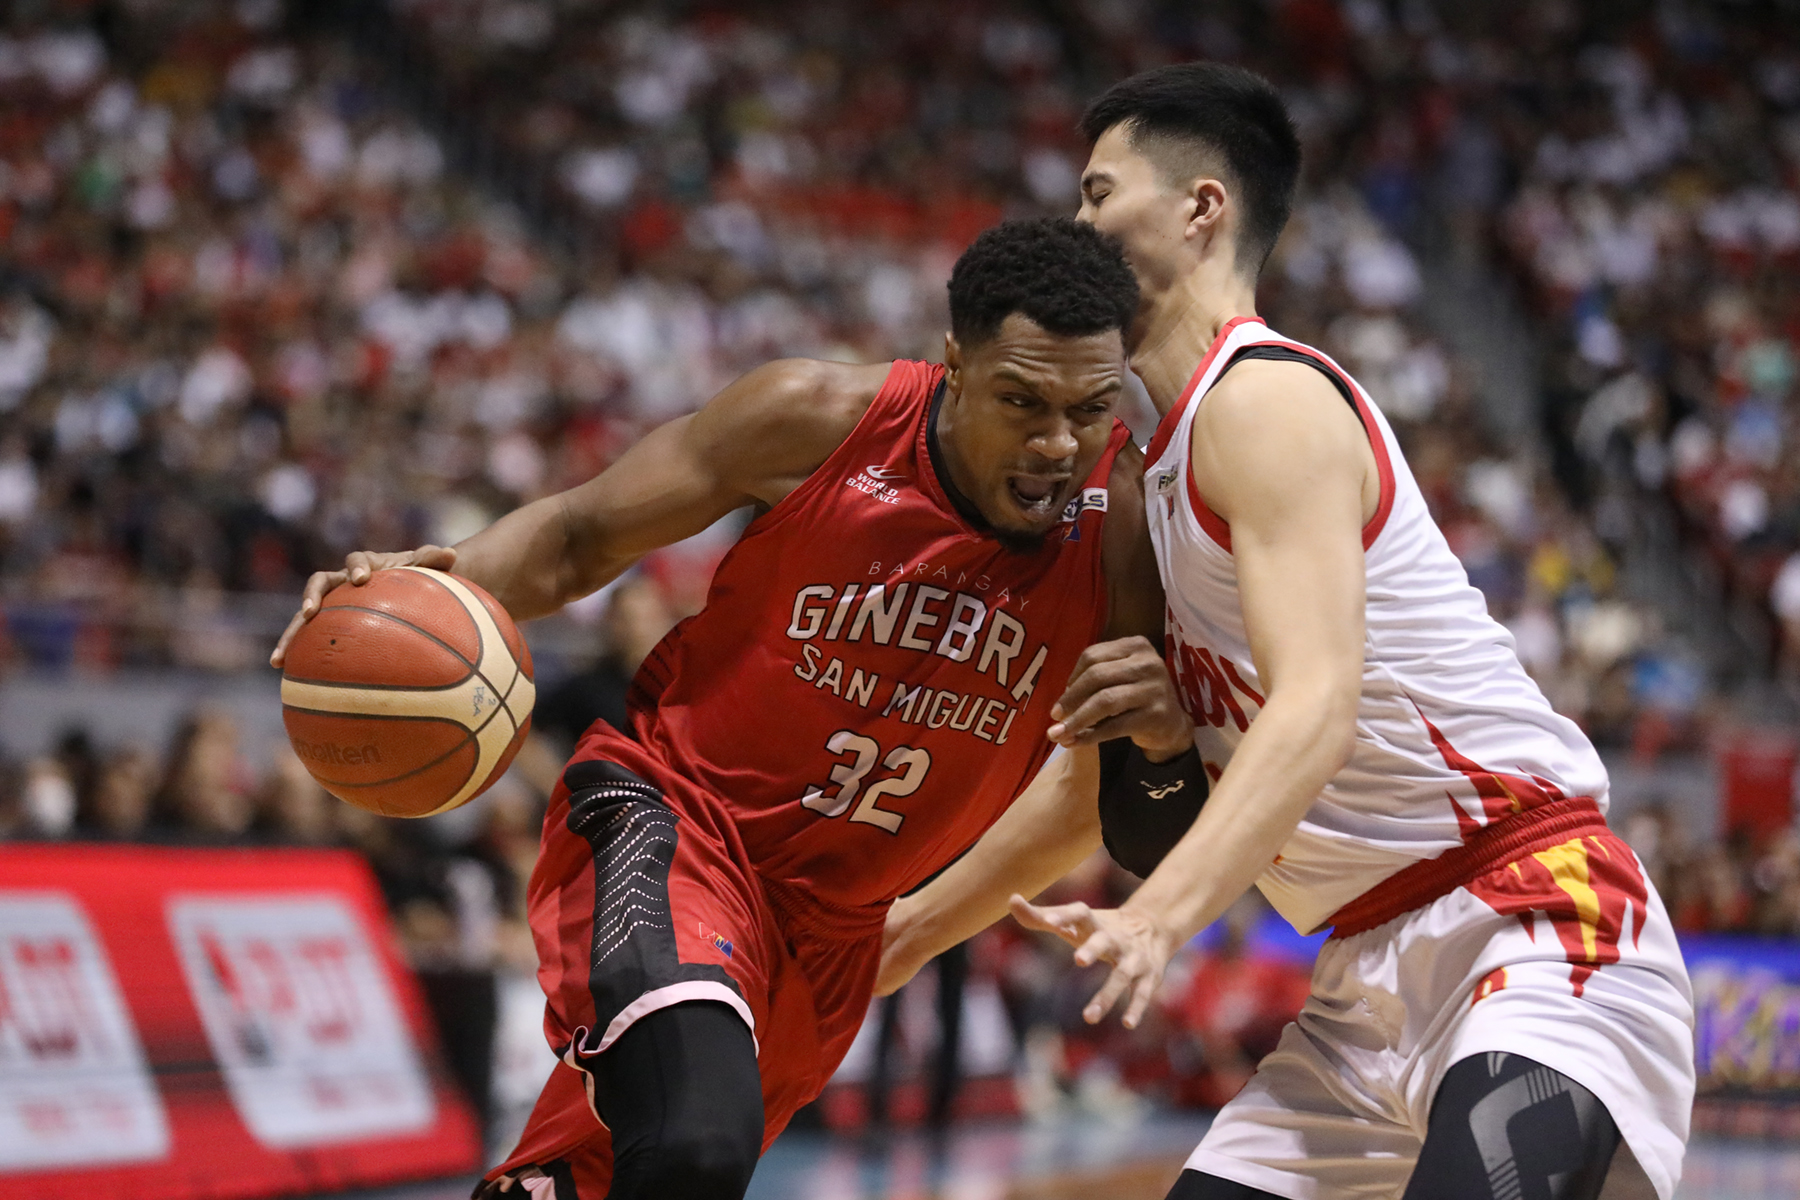 Ginebra dumps Bay Area in Game 7 to win PBA title in front of record crowd